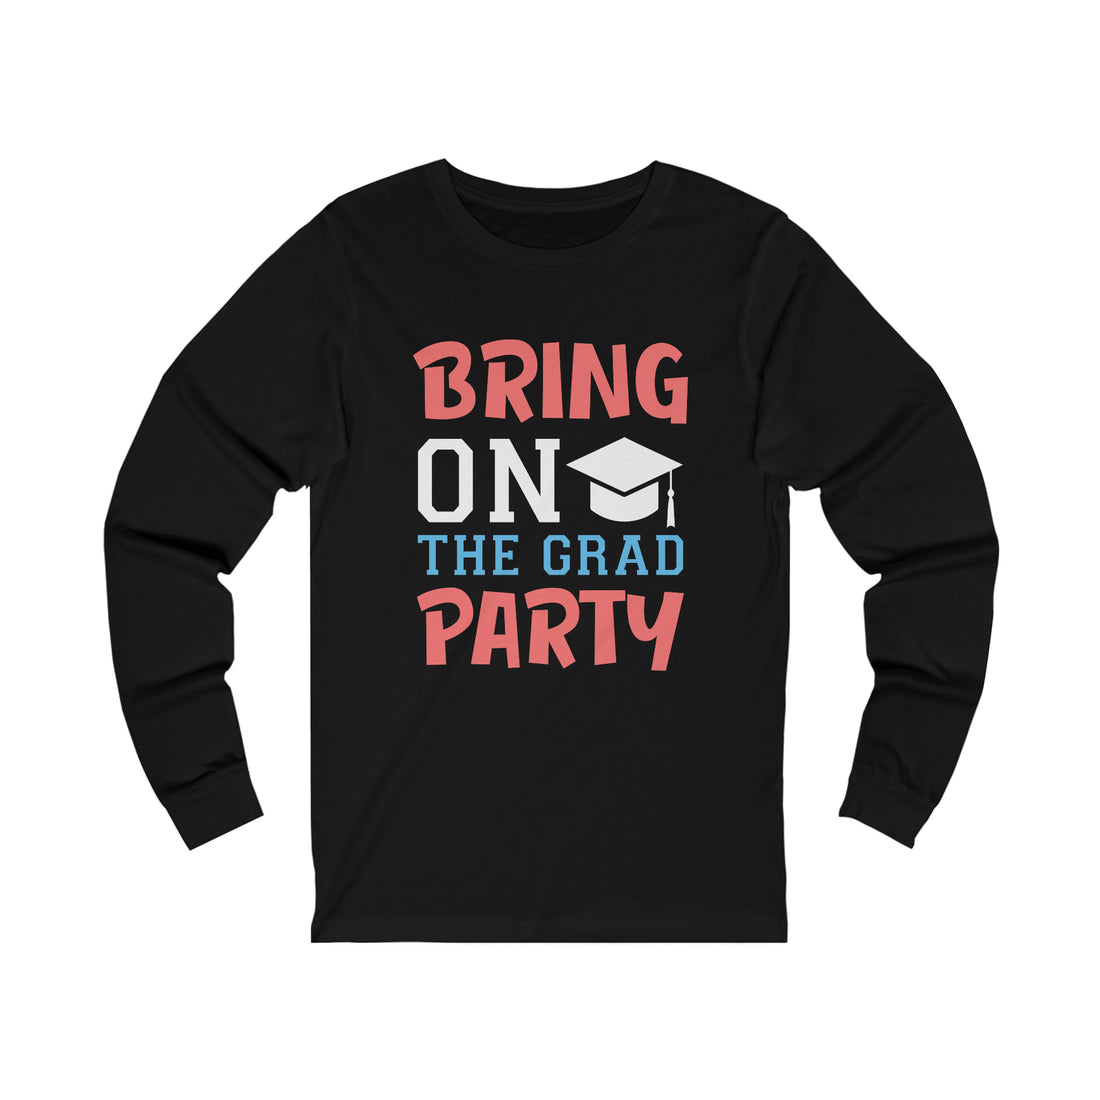 Bring On The Grad Party - Unisex Jersey Long Sleeve Tee